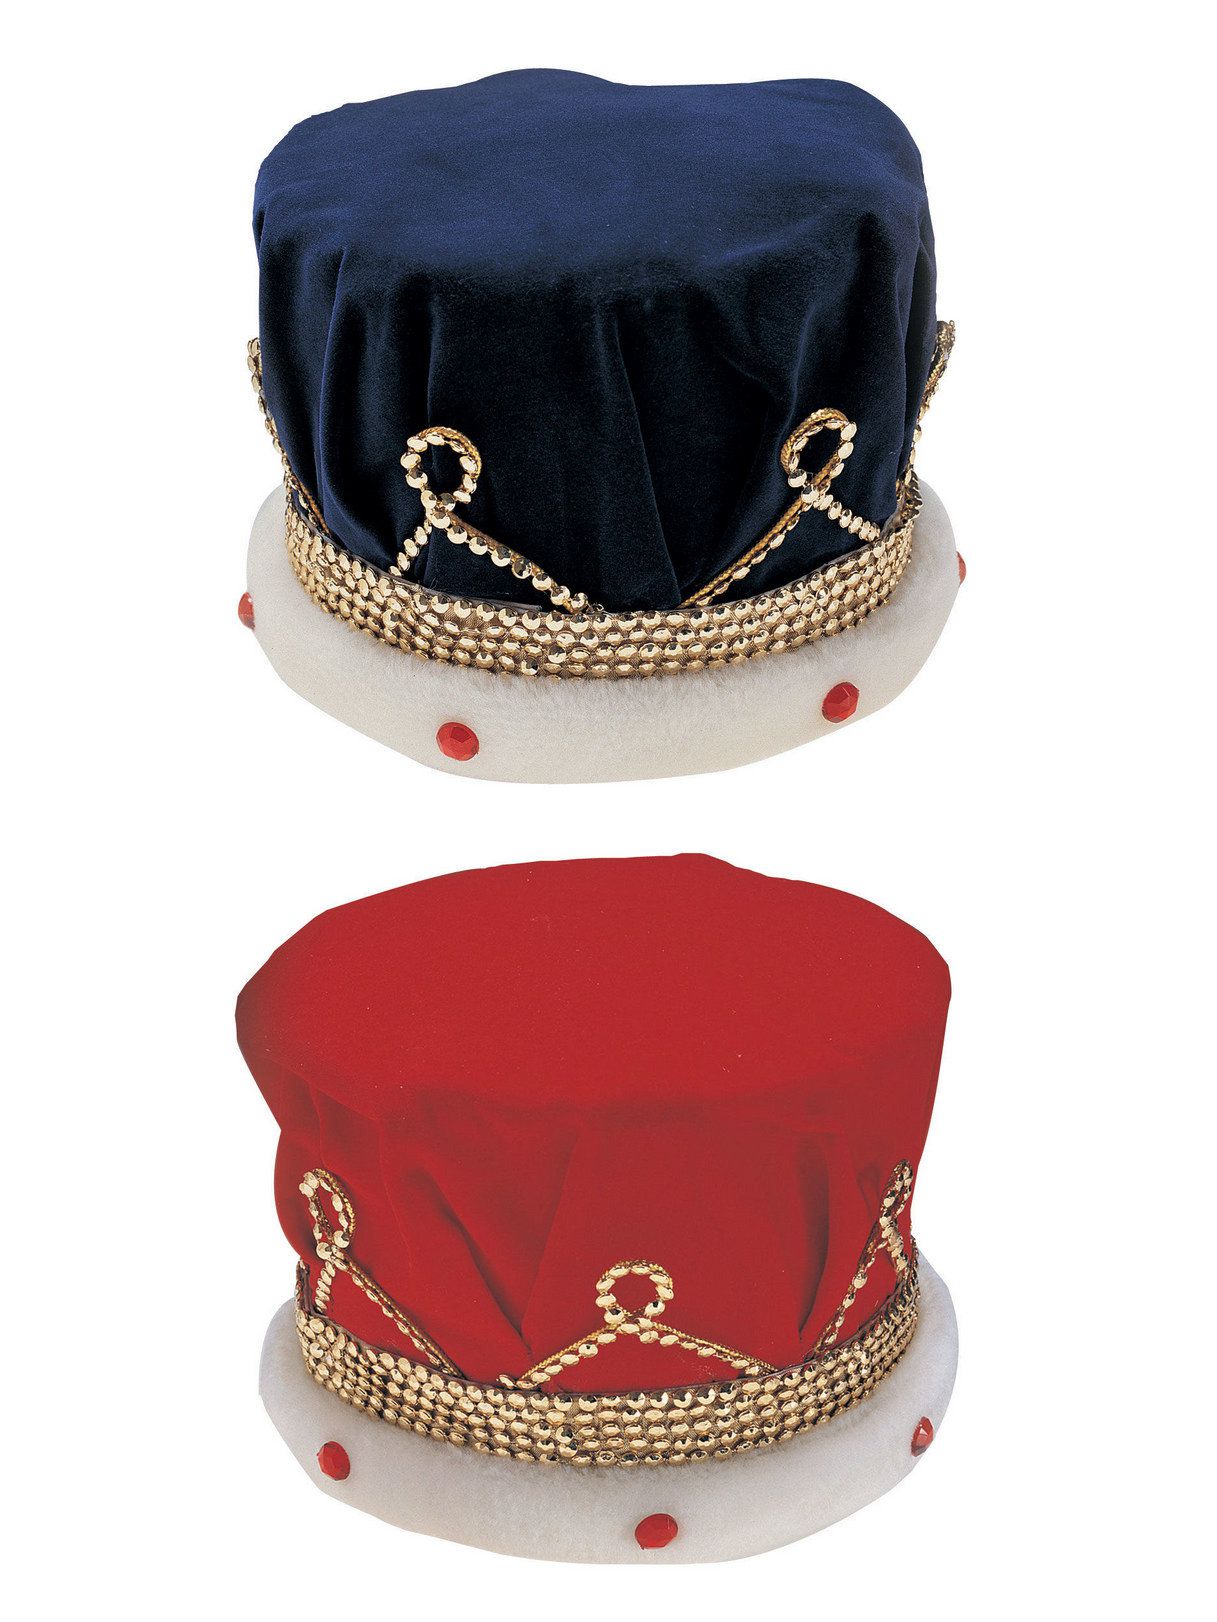 Royal King's Red Crown - costumes.com